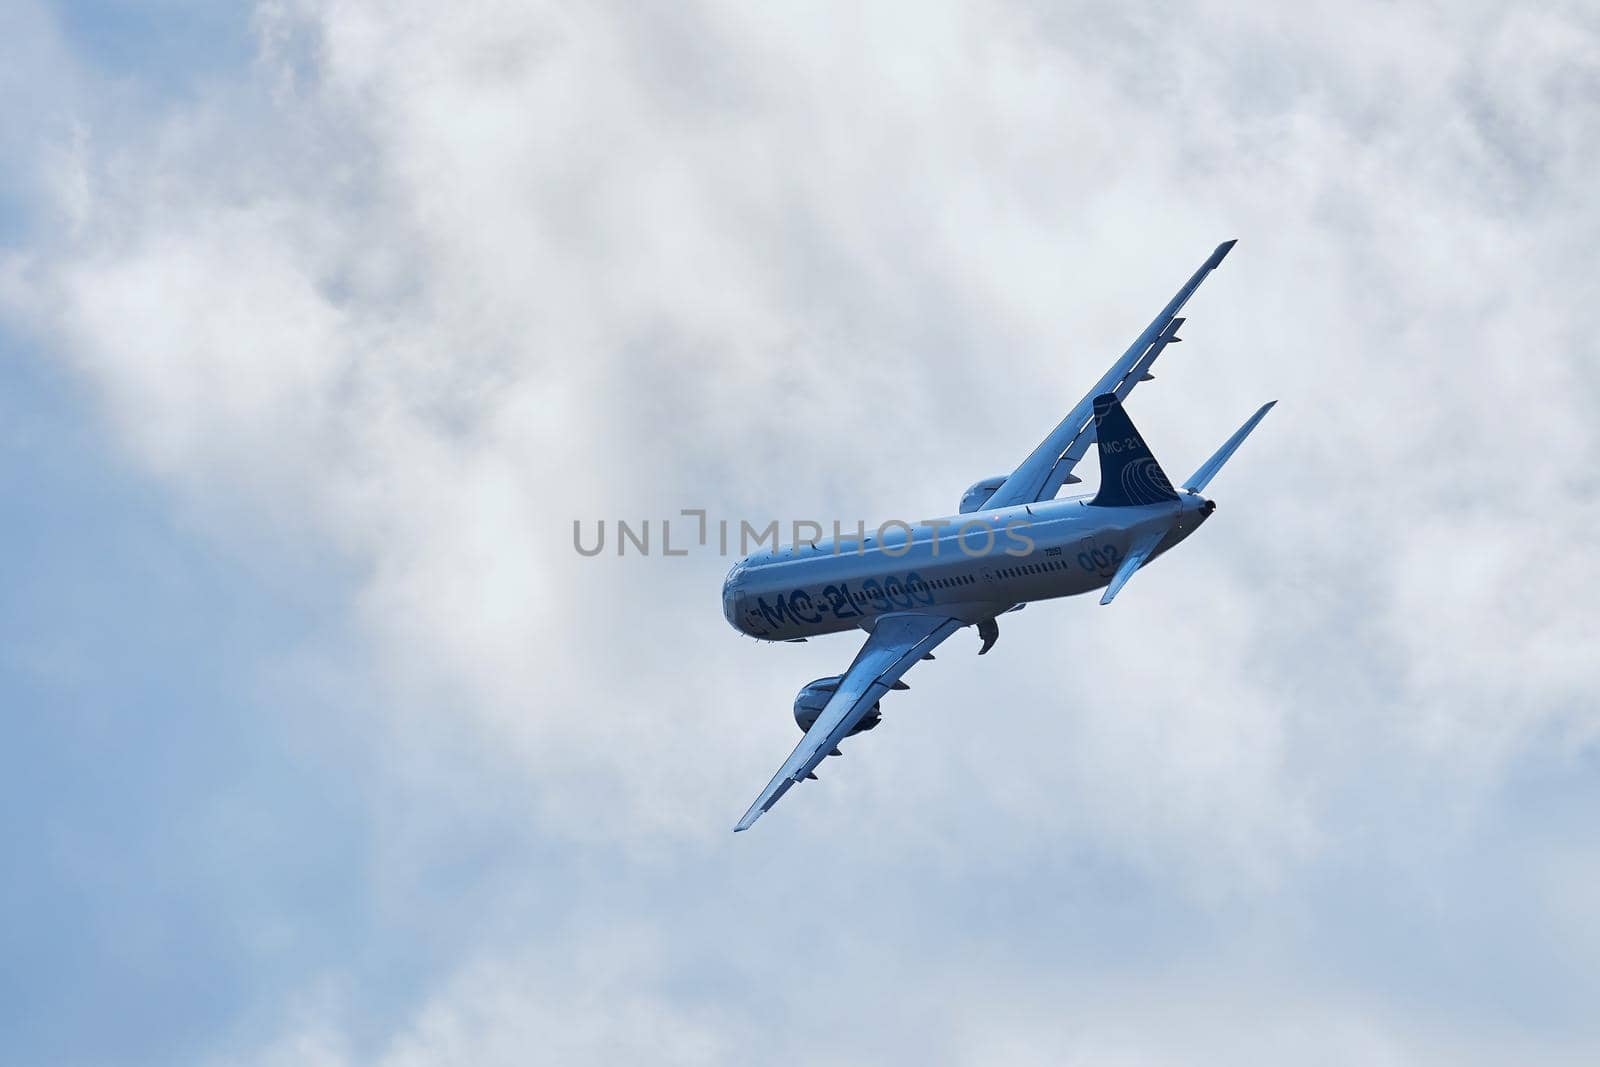 New Russian passenger aircraft MS-21-300 flying prototype of a new Russian civil airliner during test flights on MAKS 2019 airshow. ZHUKOVSKY, RUSSIA, AUGUST 27, 2019.